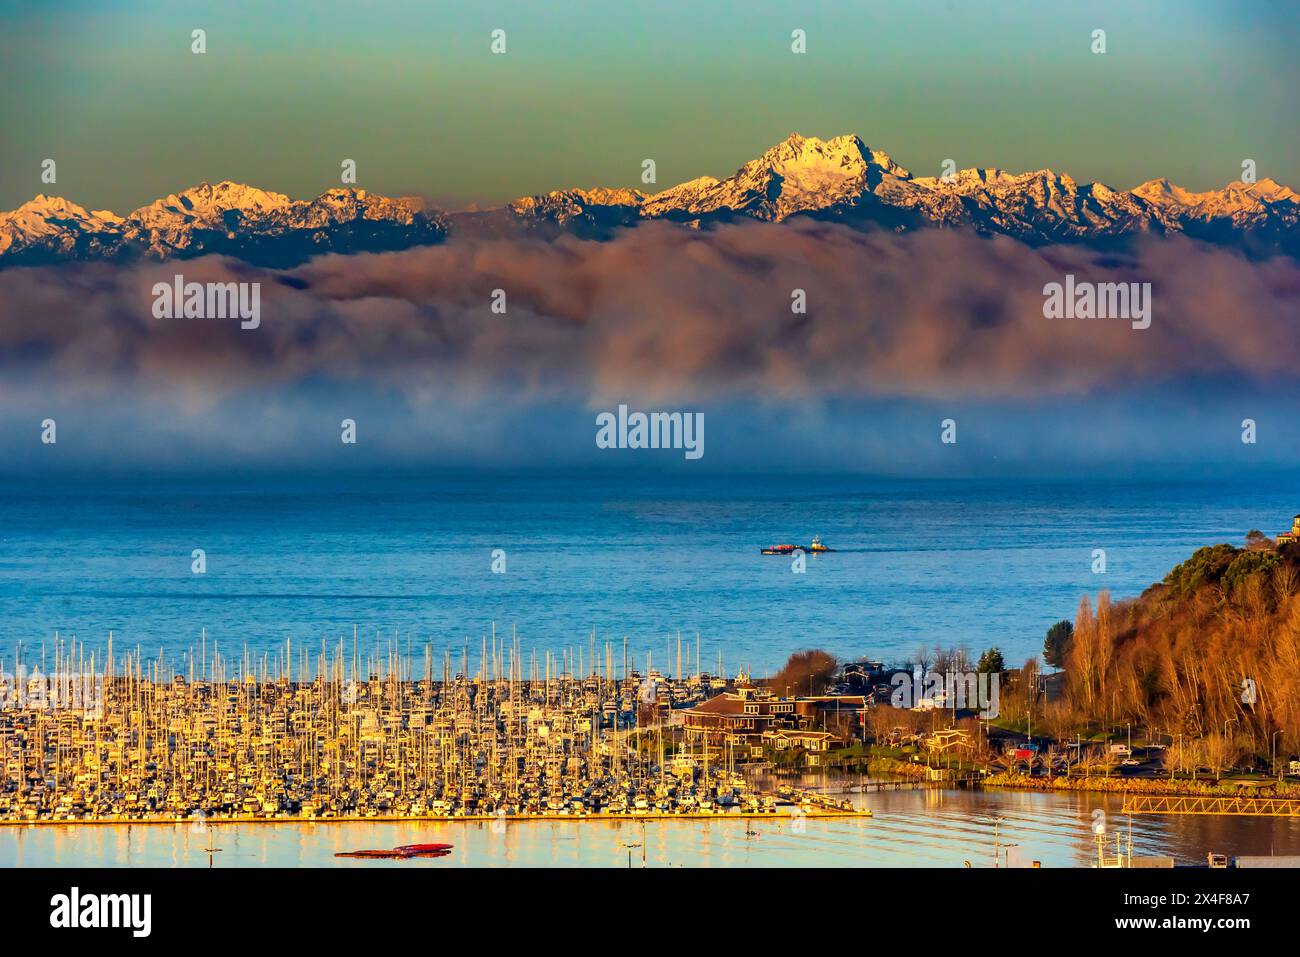 USA, Washington State, Seattle. Dawn on the Olympic Mountains that overlook a marina on the Puget Sound. Stock Photo